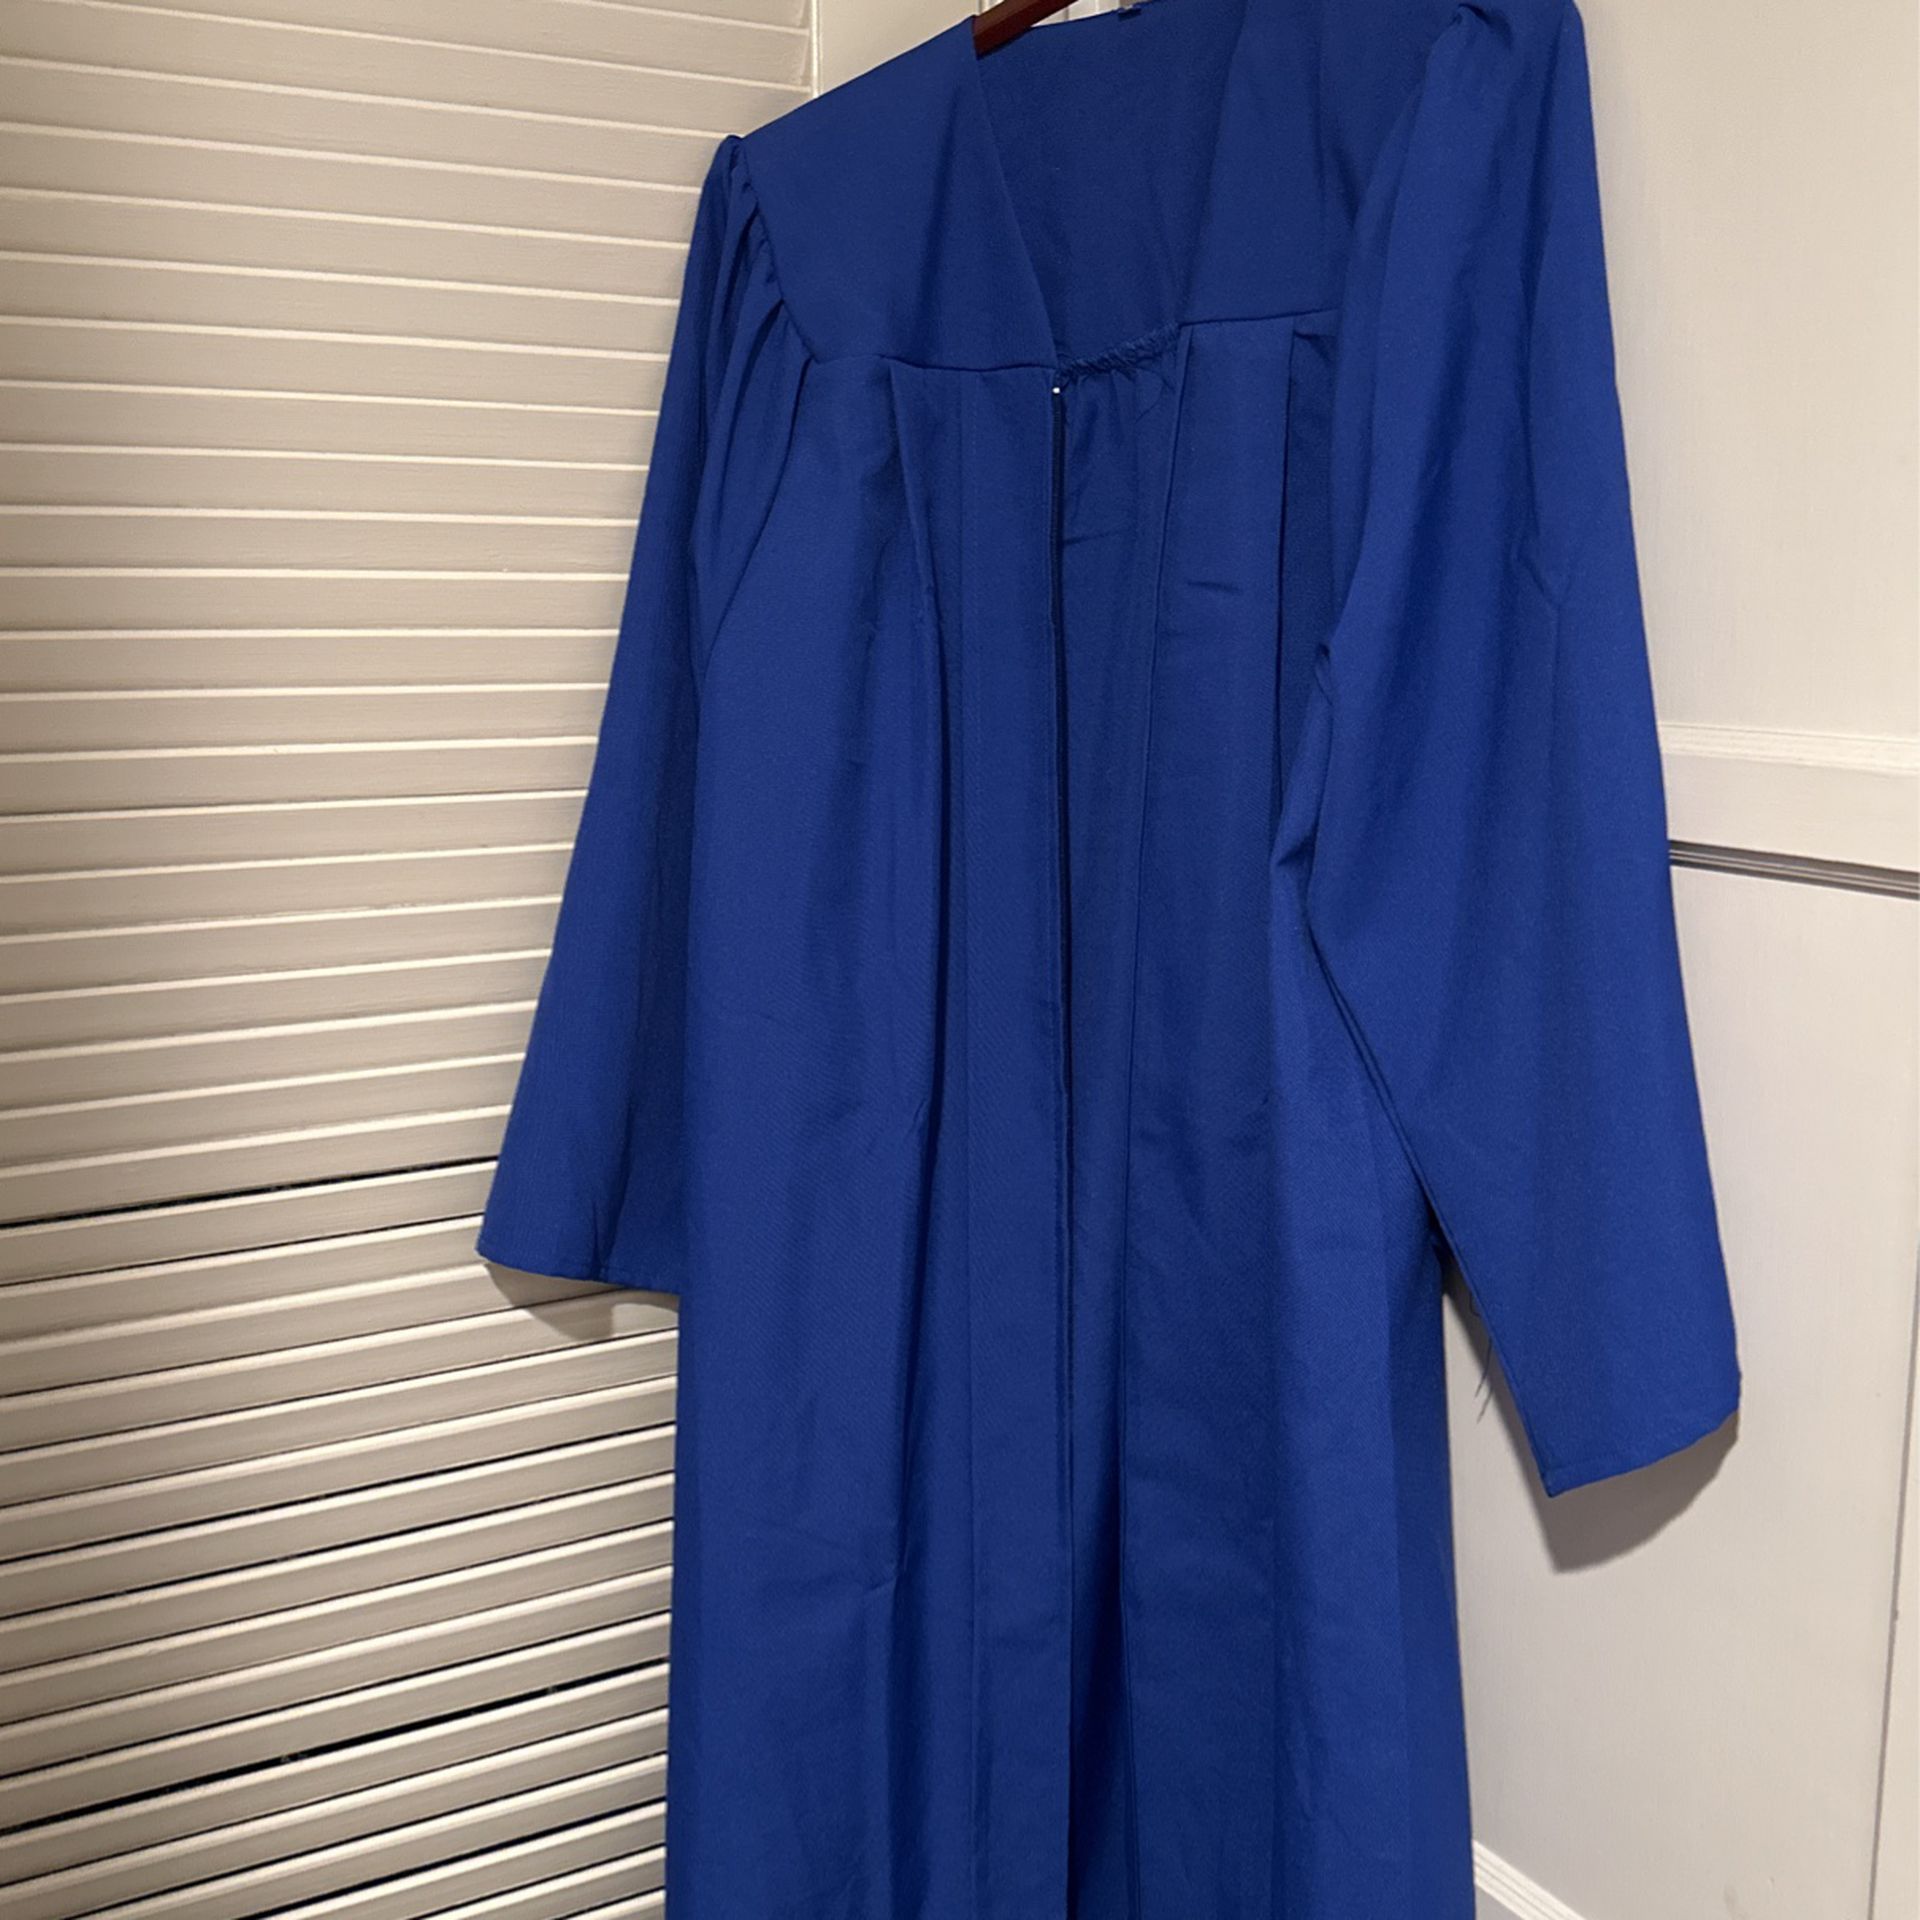 Graduation Cap And Gown. 